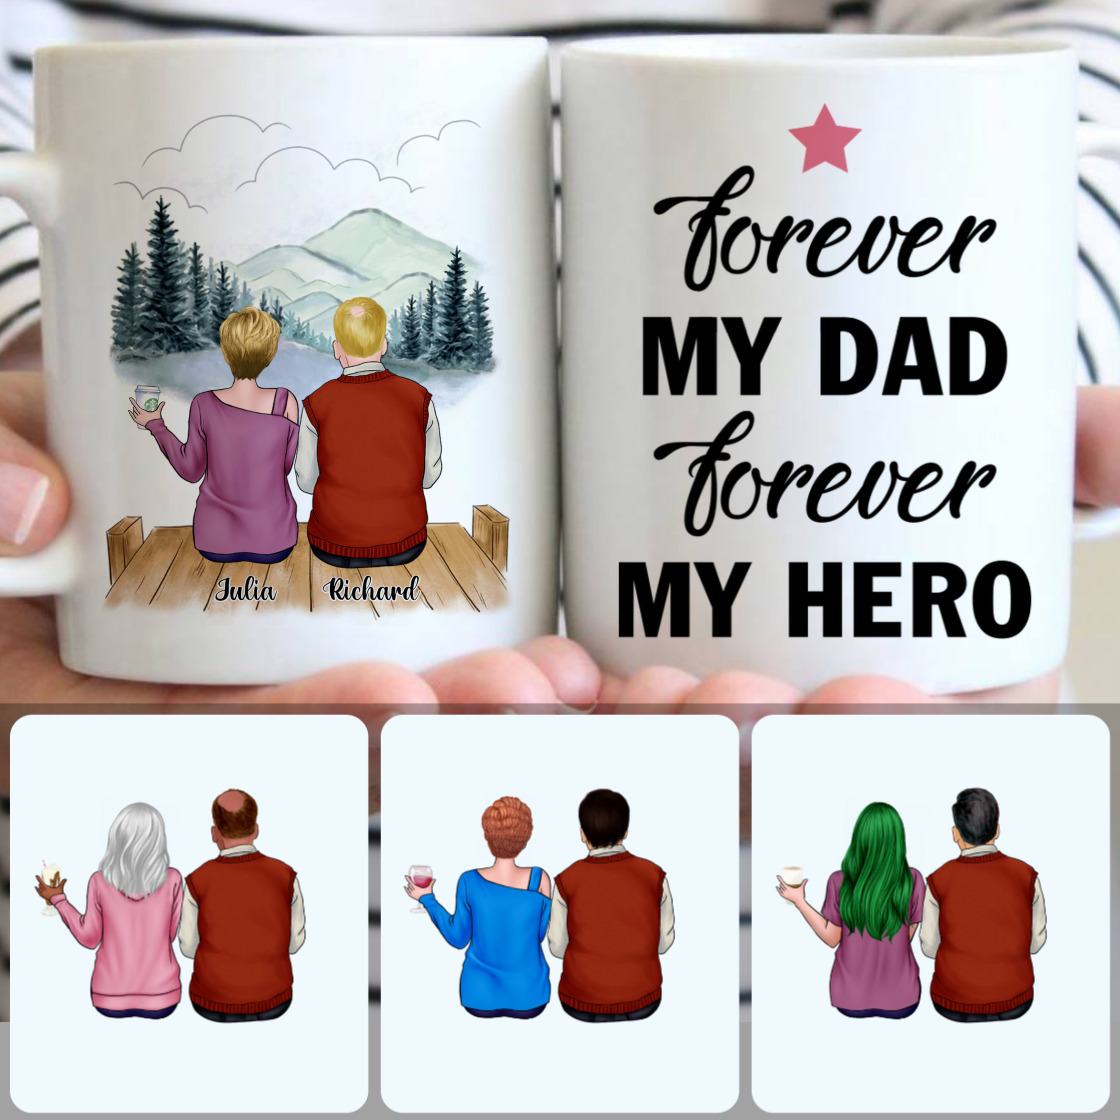 Personalized Mug, Special Gifts For Dad Papa, Father & Daughter Customized Coffee Mug With Names